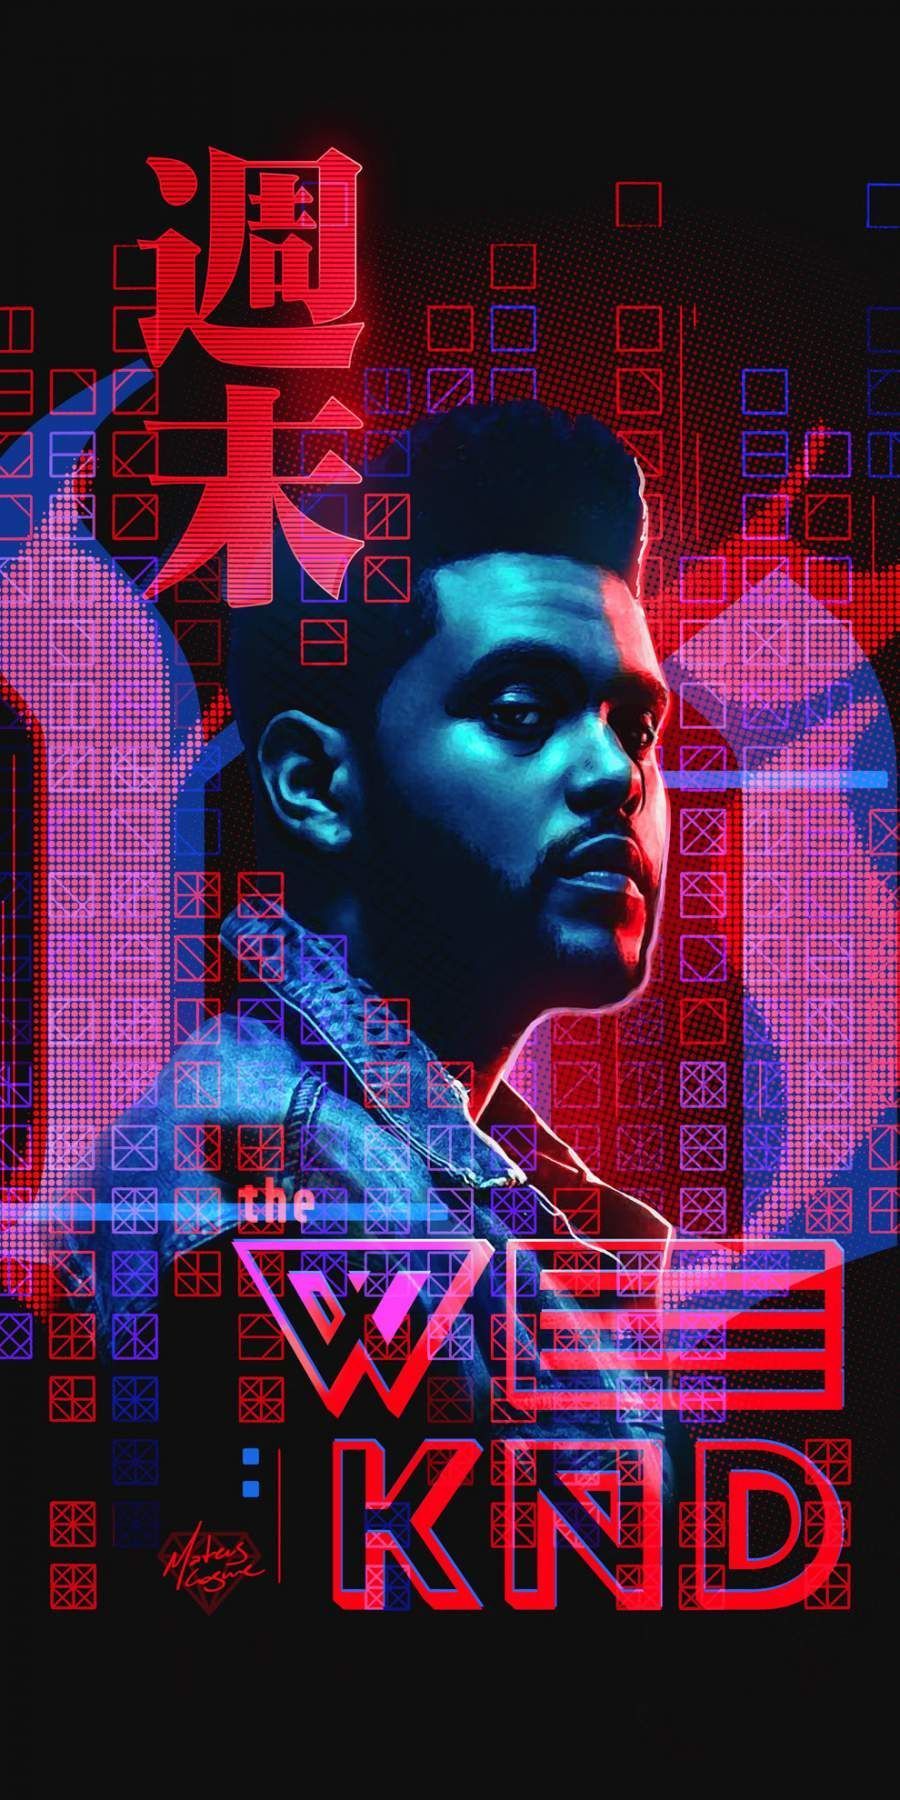 The poster for we kind - The Weeknd